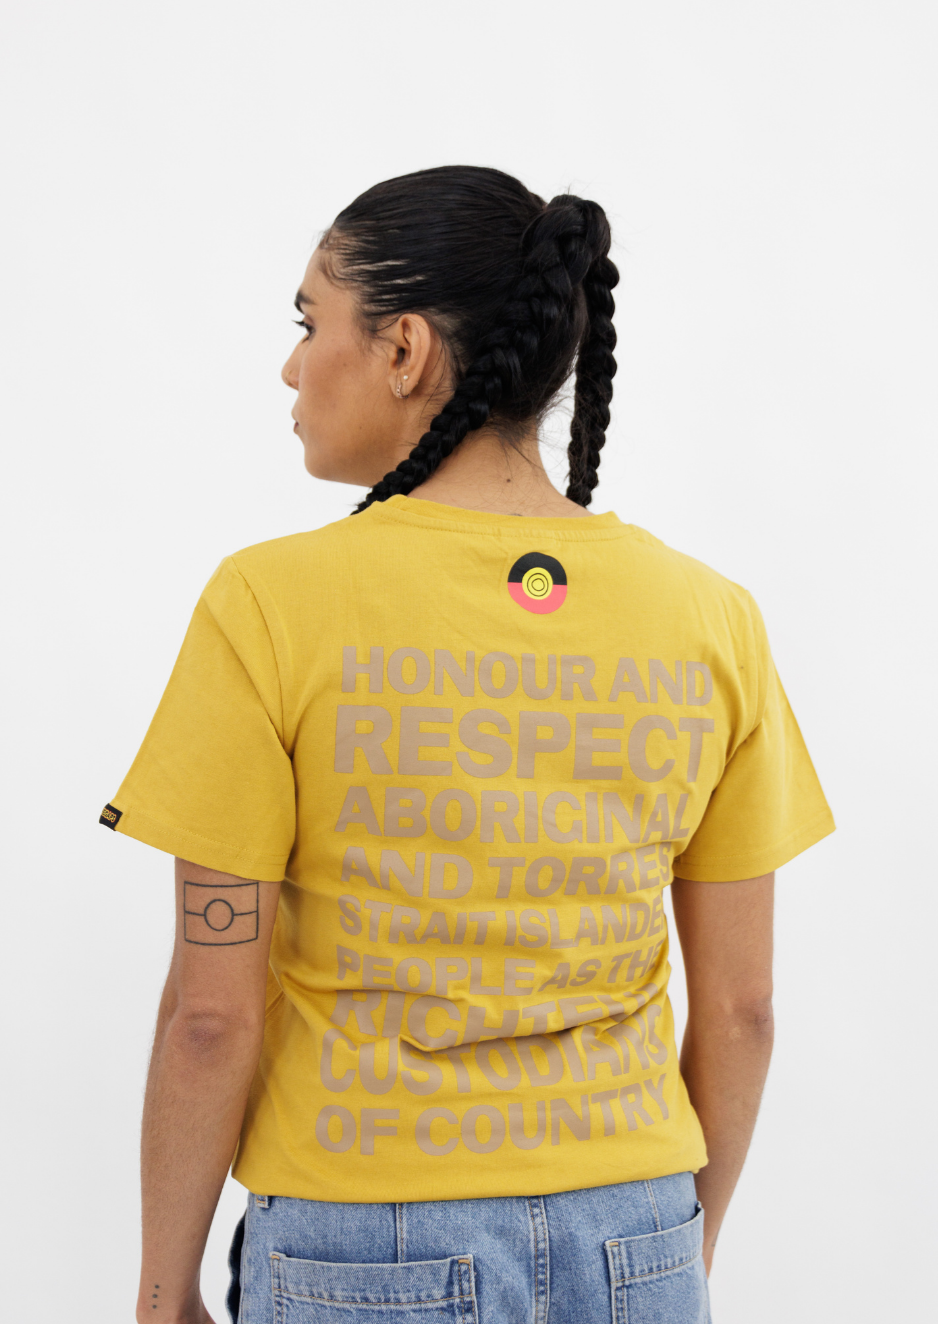 Clothing The Gaps. Kids Mustard Honour Country Tee. Mustard yellow t-shirt with screen printed bold capital text 'Honour and respect Aboriginal and Torres Strait Islander people as the rightful custodians of country.' The word 'Honour country' on the front in the same text and contrasting colour.